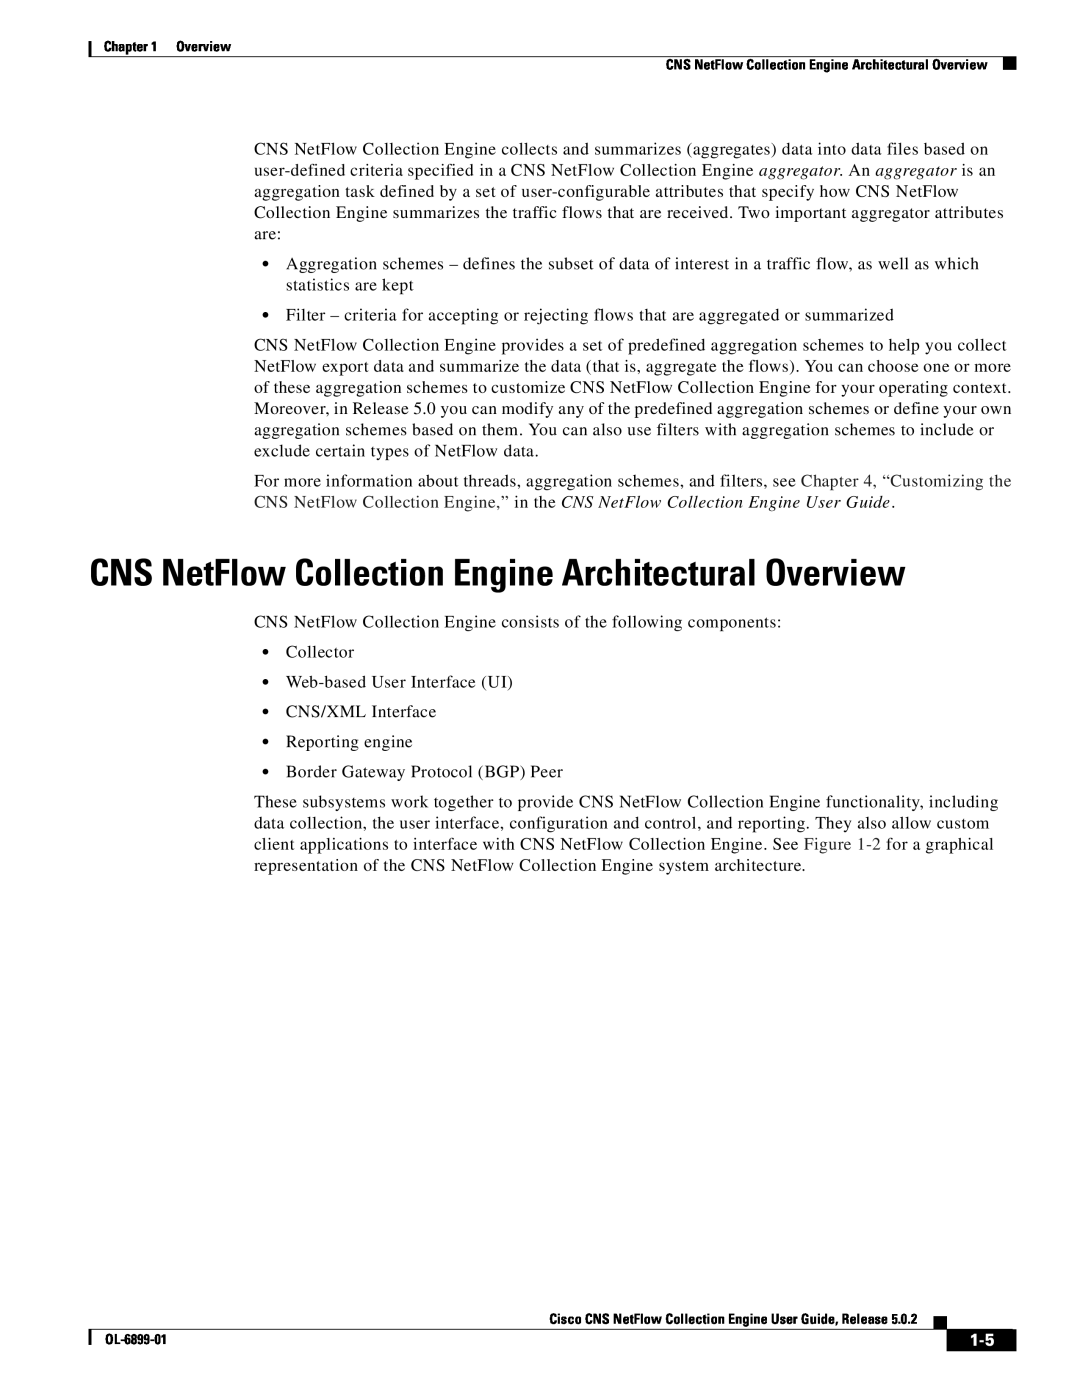 Cisco Systems OL-6900-01 manual CNS NetFlow Collection Engine Architectural Overview 